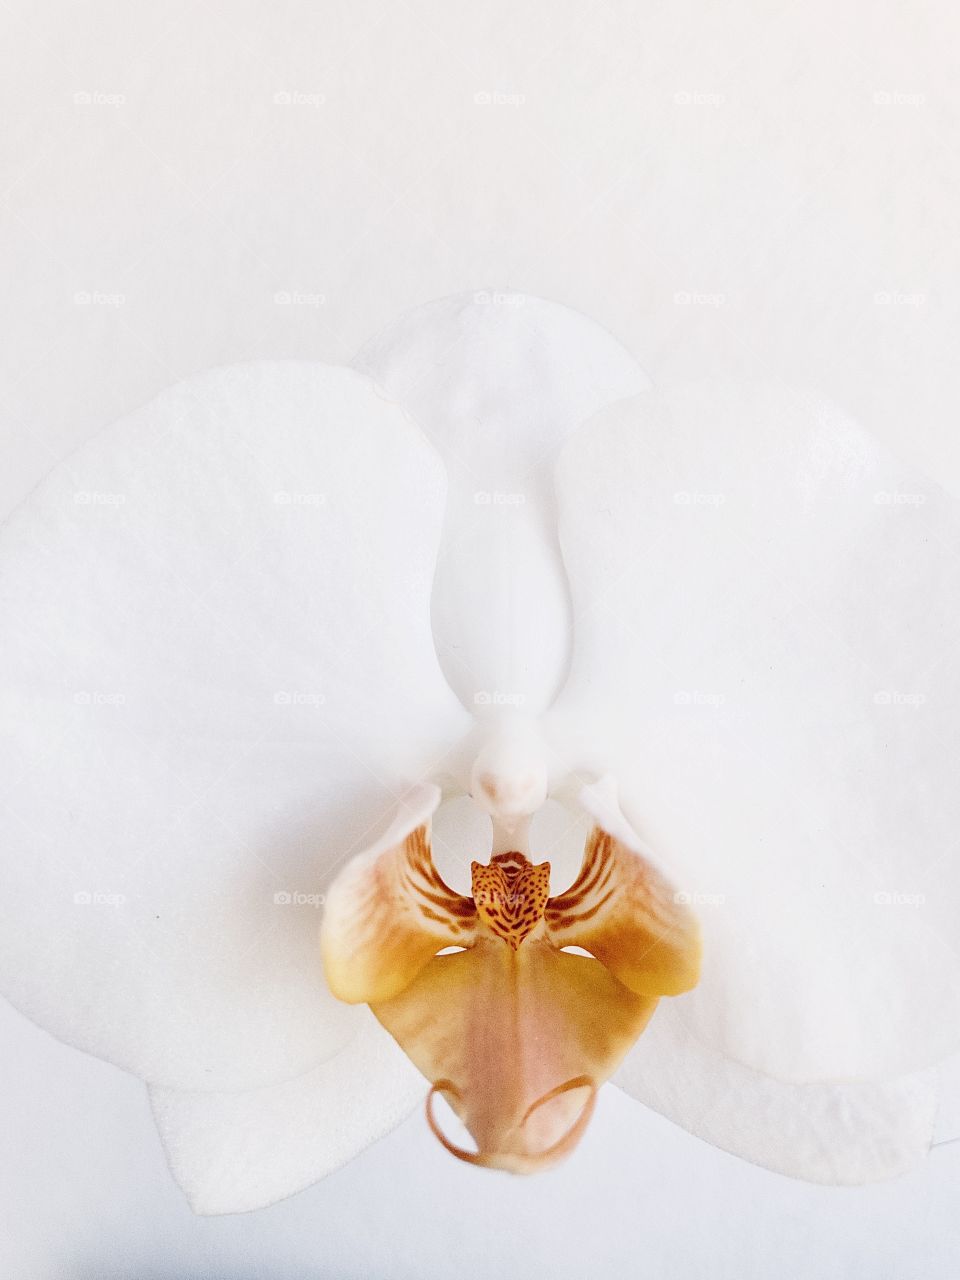 Orchid / Orchidee